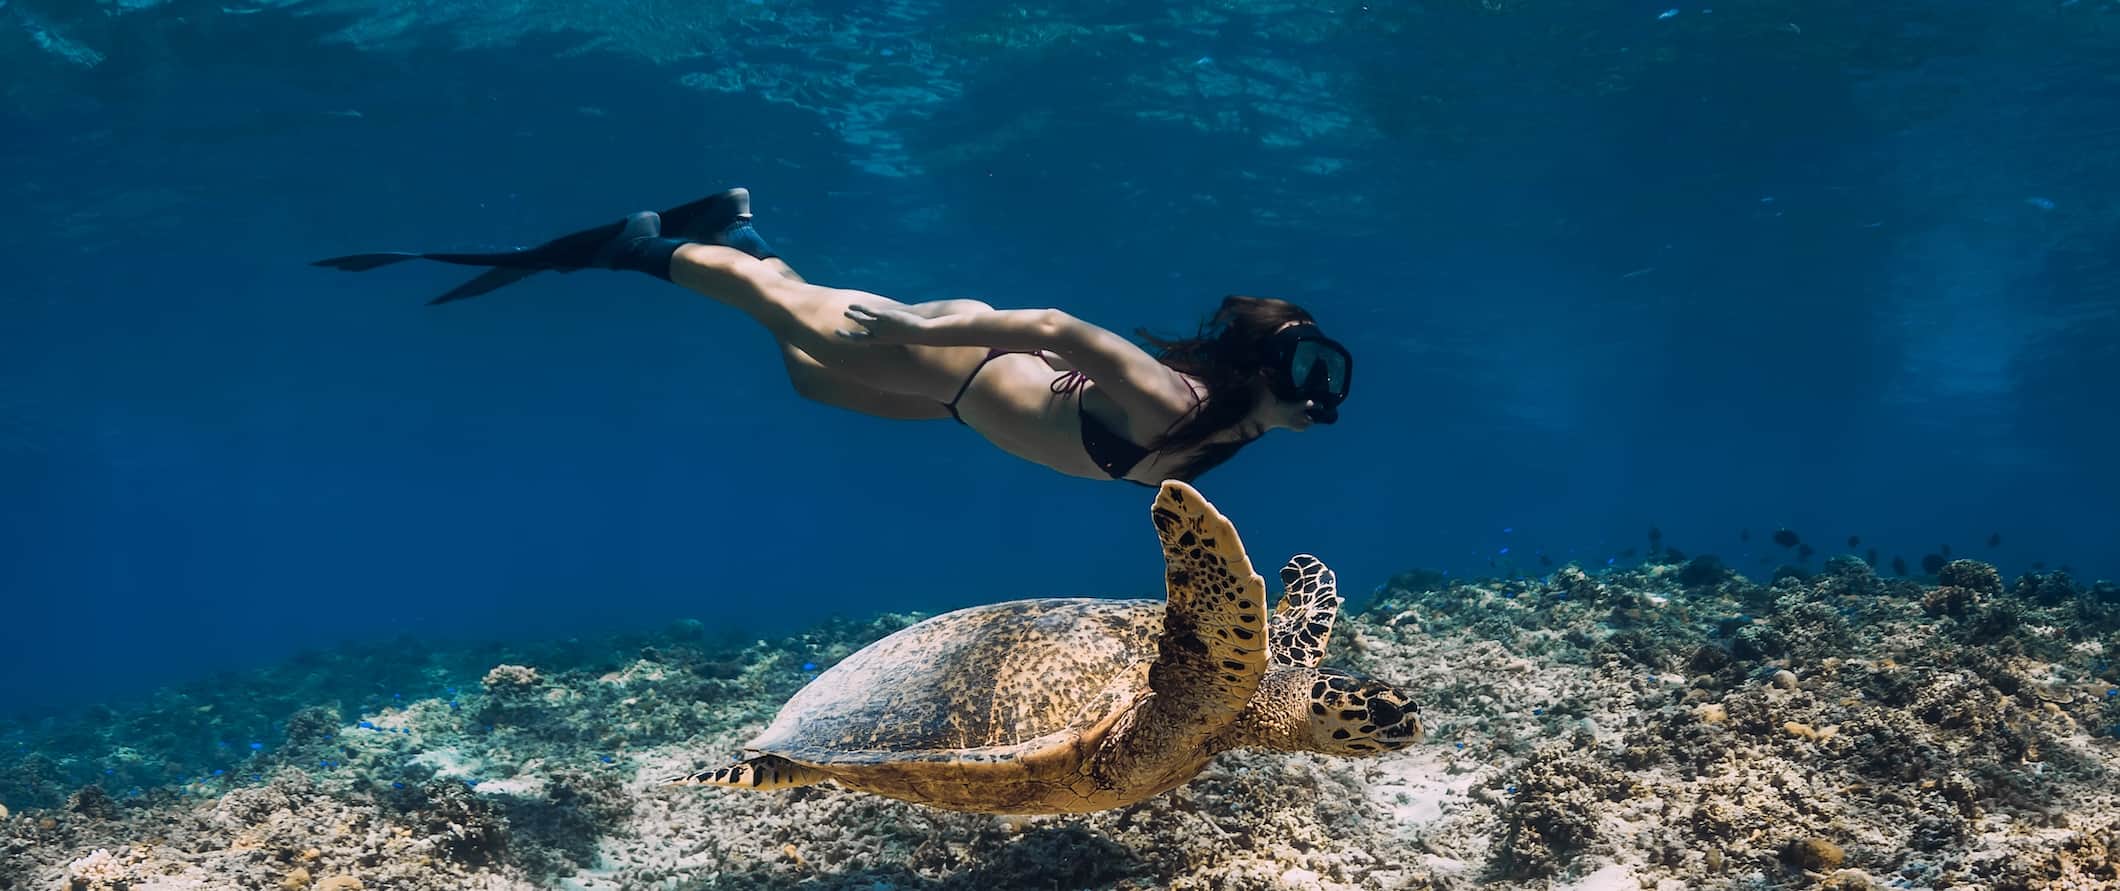 A women swimming with a sea turtle underwater in the Gili Islands, Indonesia